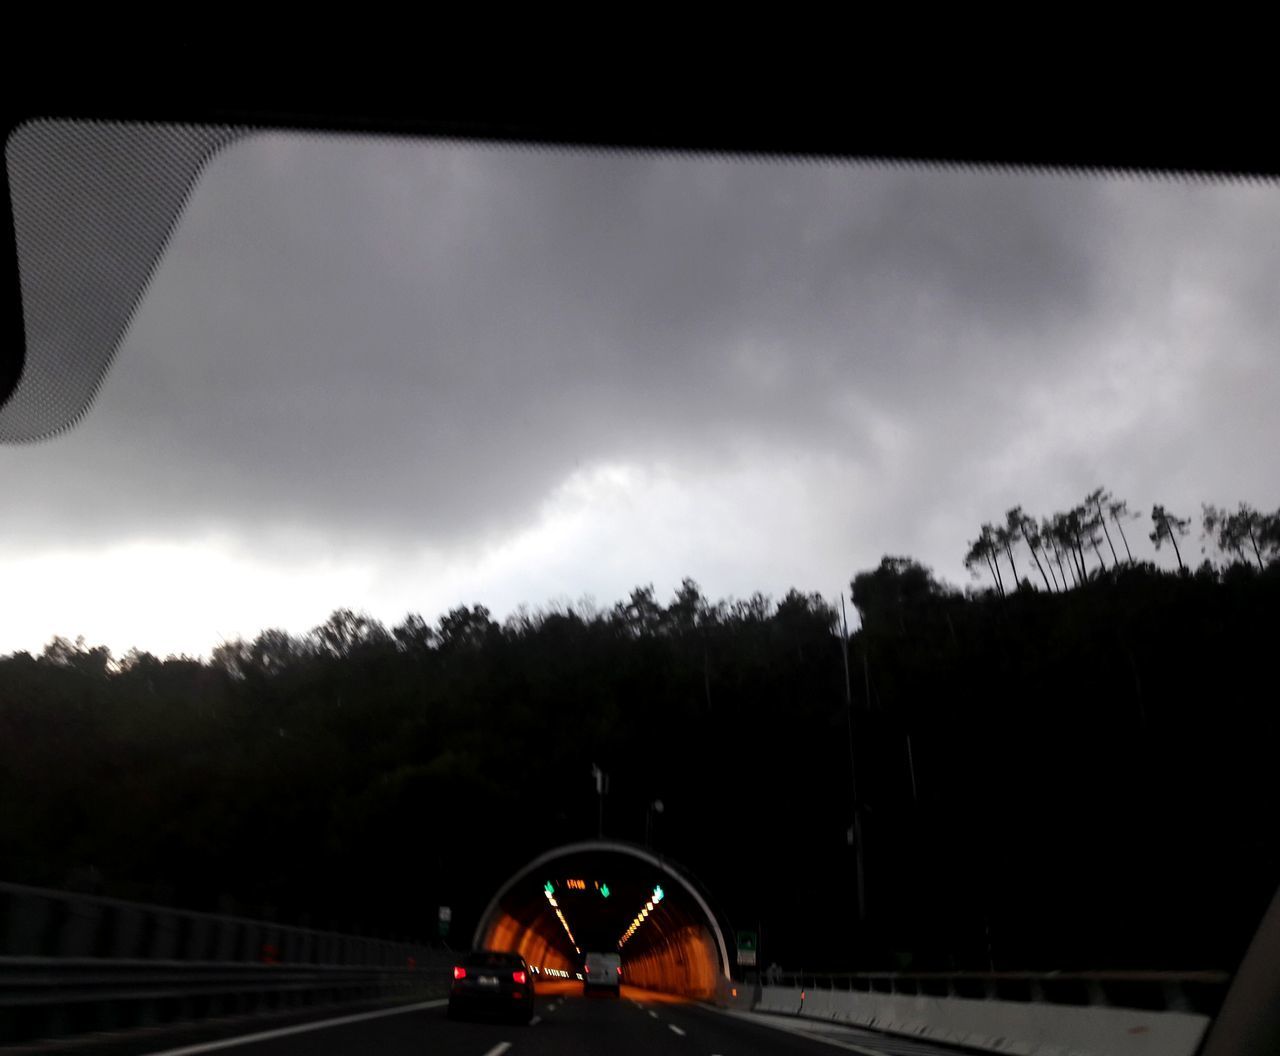 CAR MOVING ON ROAD AGAINST CLOUDY SKY